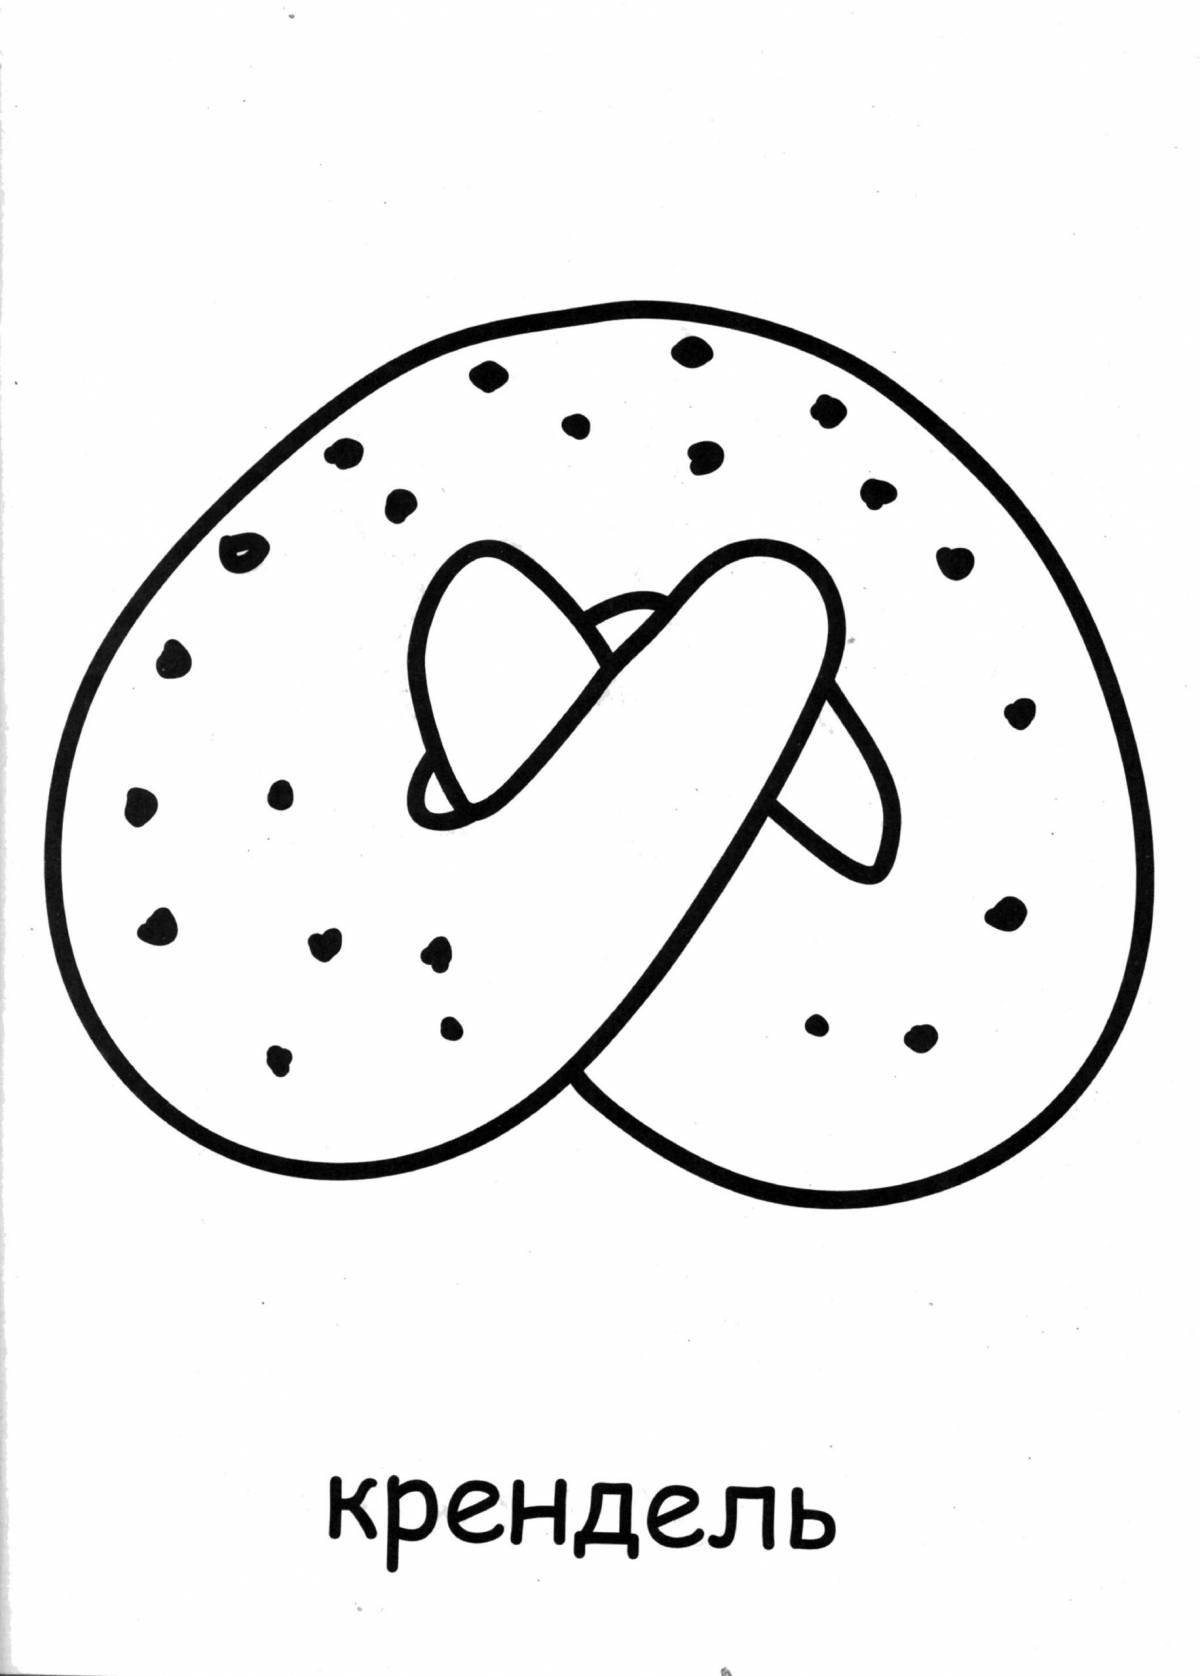 Adorable donut coloring page